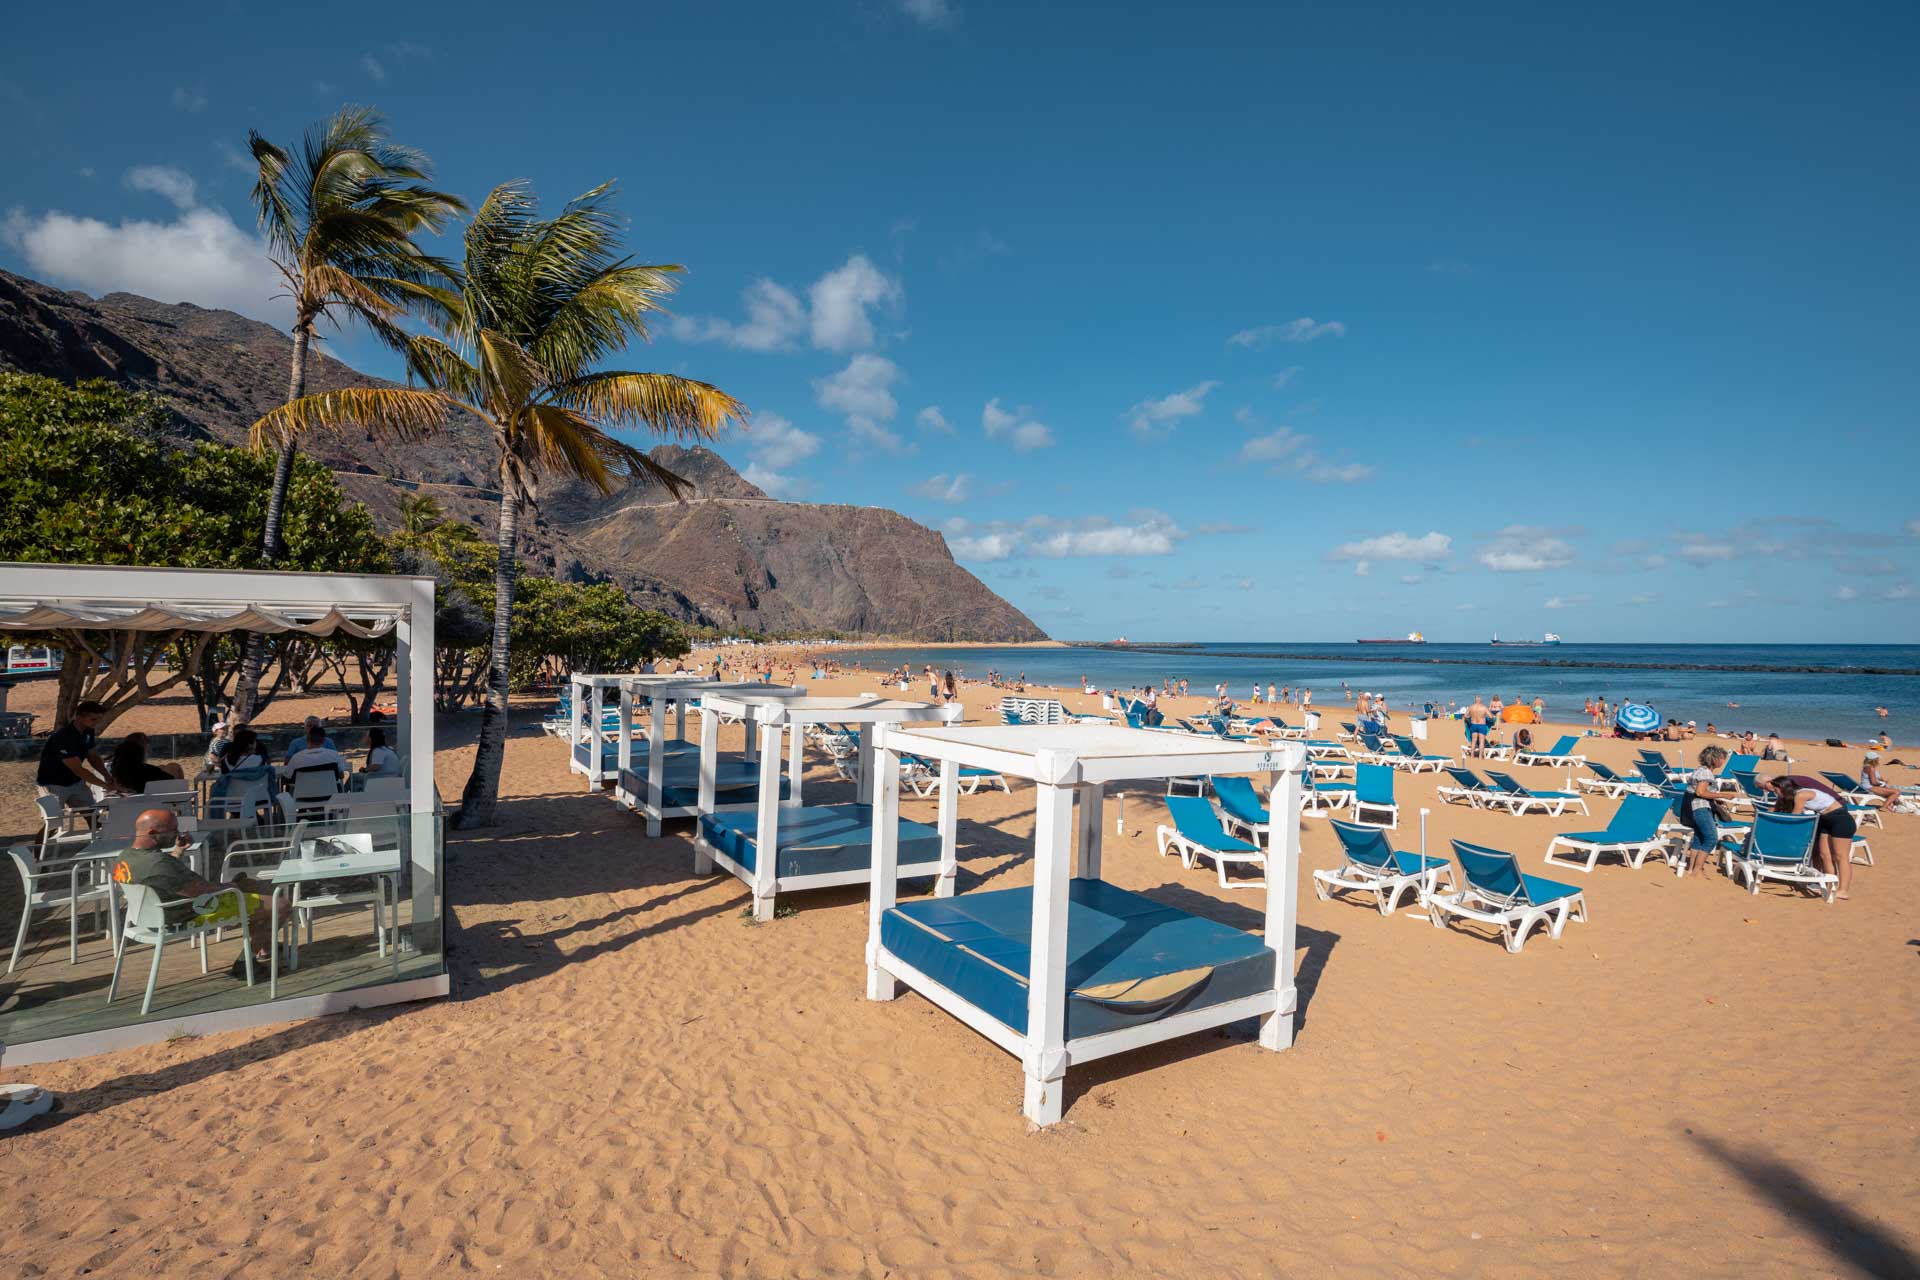 things to do in tenerife, tenerife attractions, places to visit in tenerife, what to do in tenerife, tenerife itinerary, retreats in tenerife, tenerife retreats